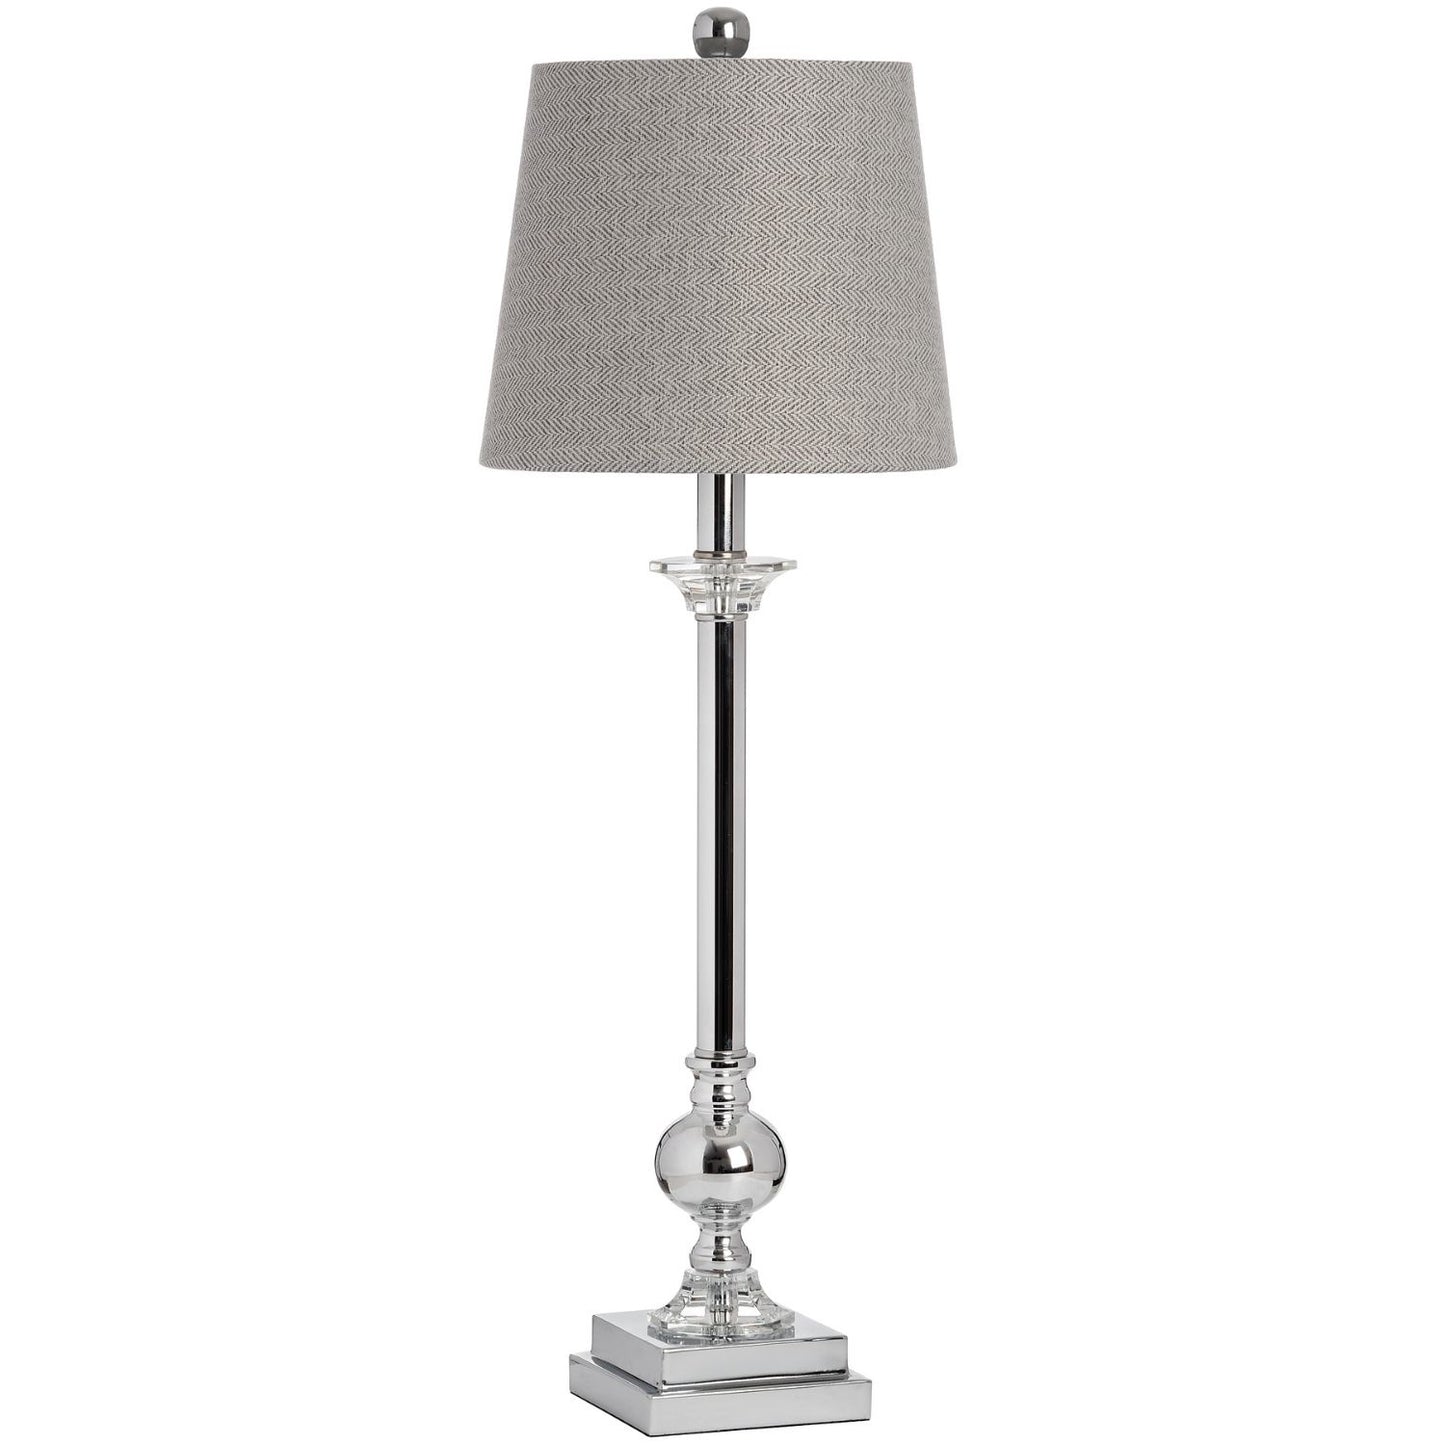 Silver Table Lamp with Grey Shade, called Knightsbridge